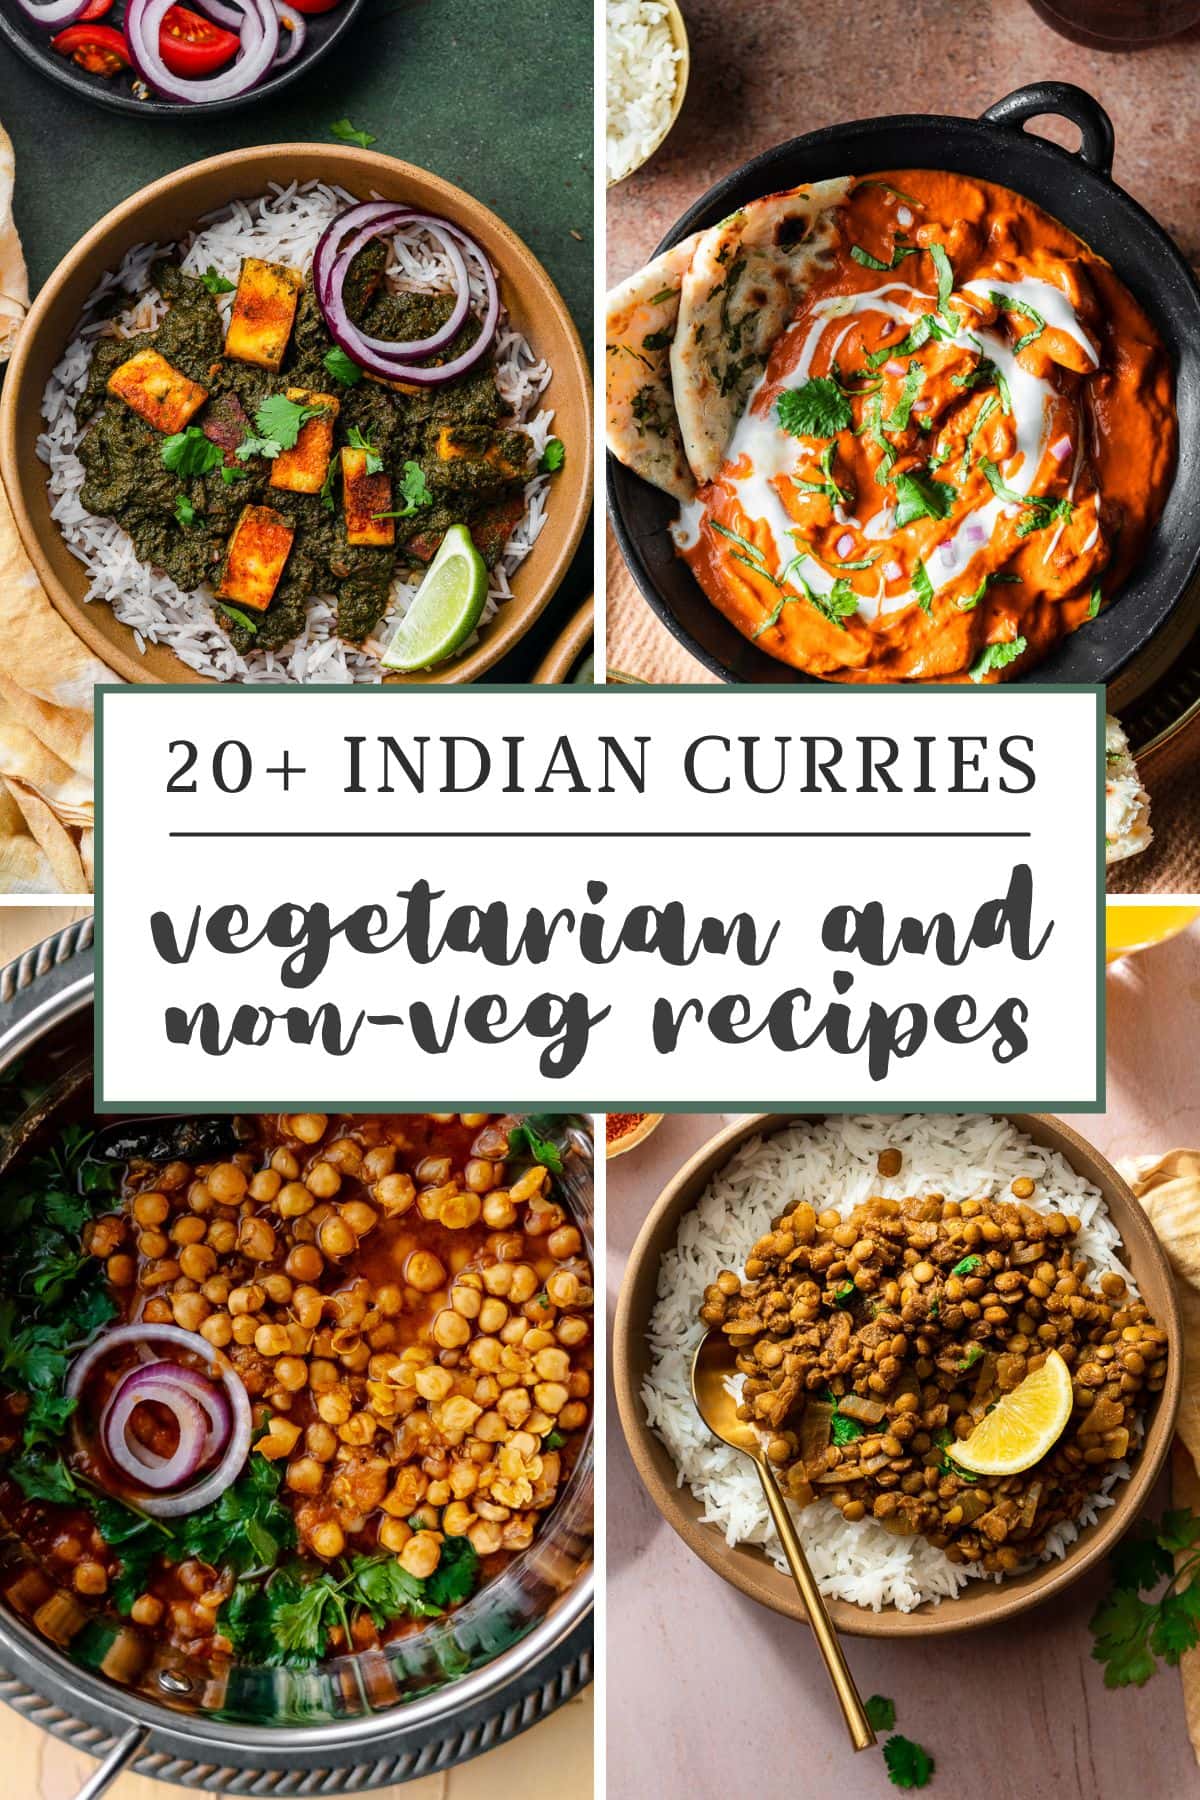 20+ Indian Curries, vegetarian and non-veg recipes with a collage of Indian curries.